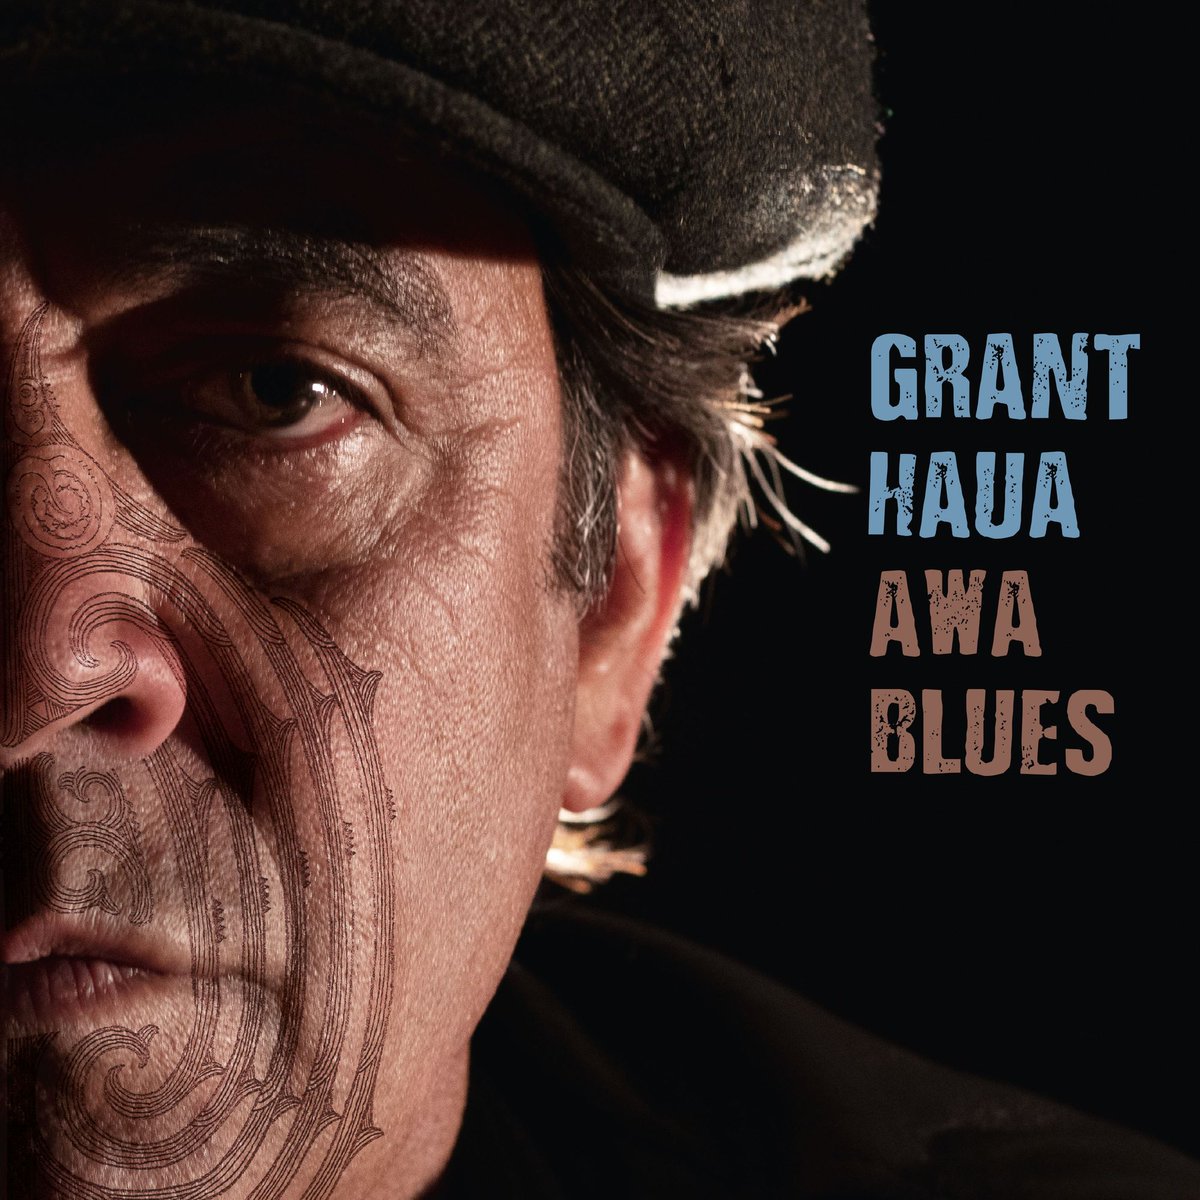 The new Grant Haua is available now !
📀 dixiefrog.lnk.to/AwaBlues